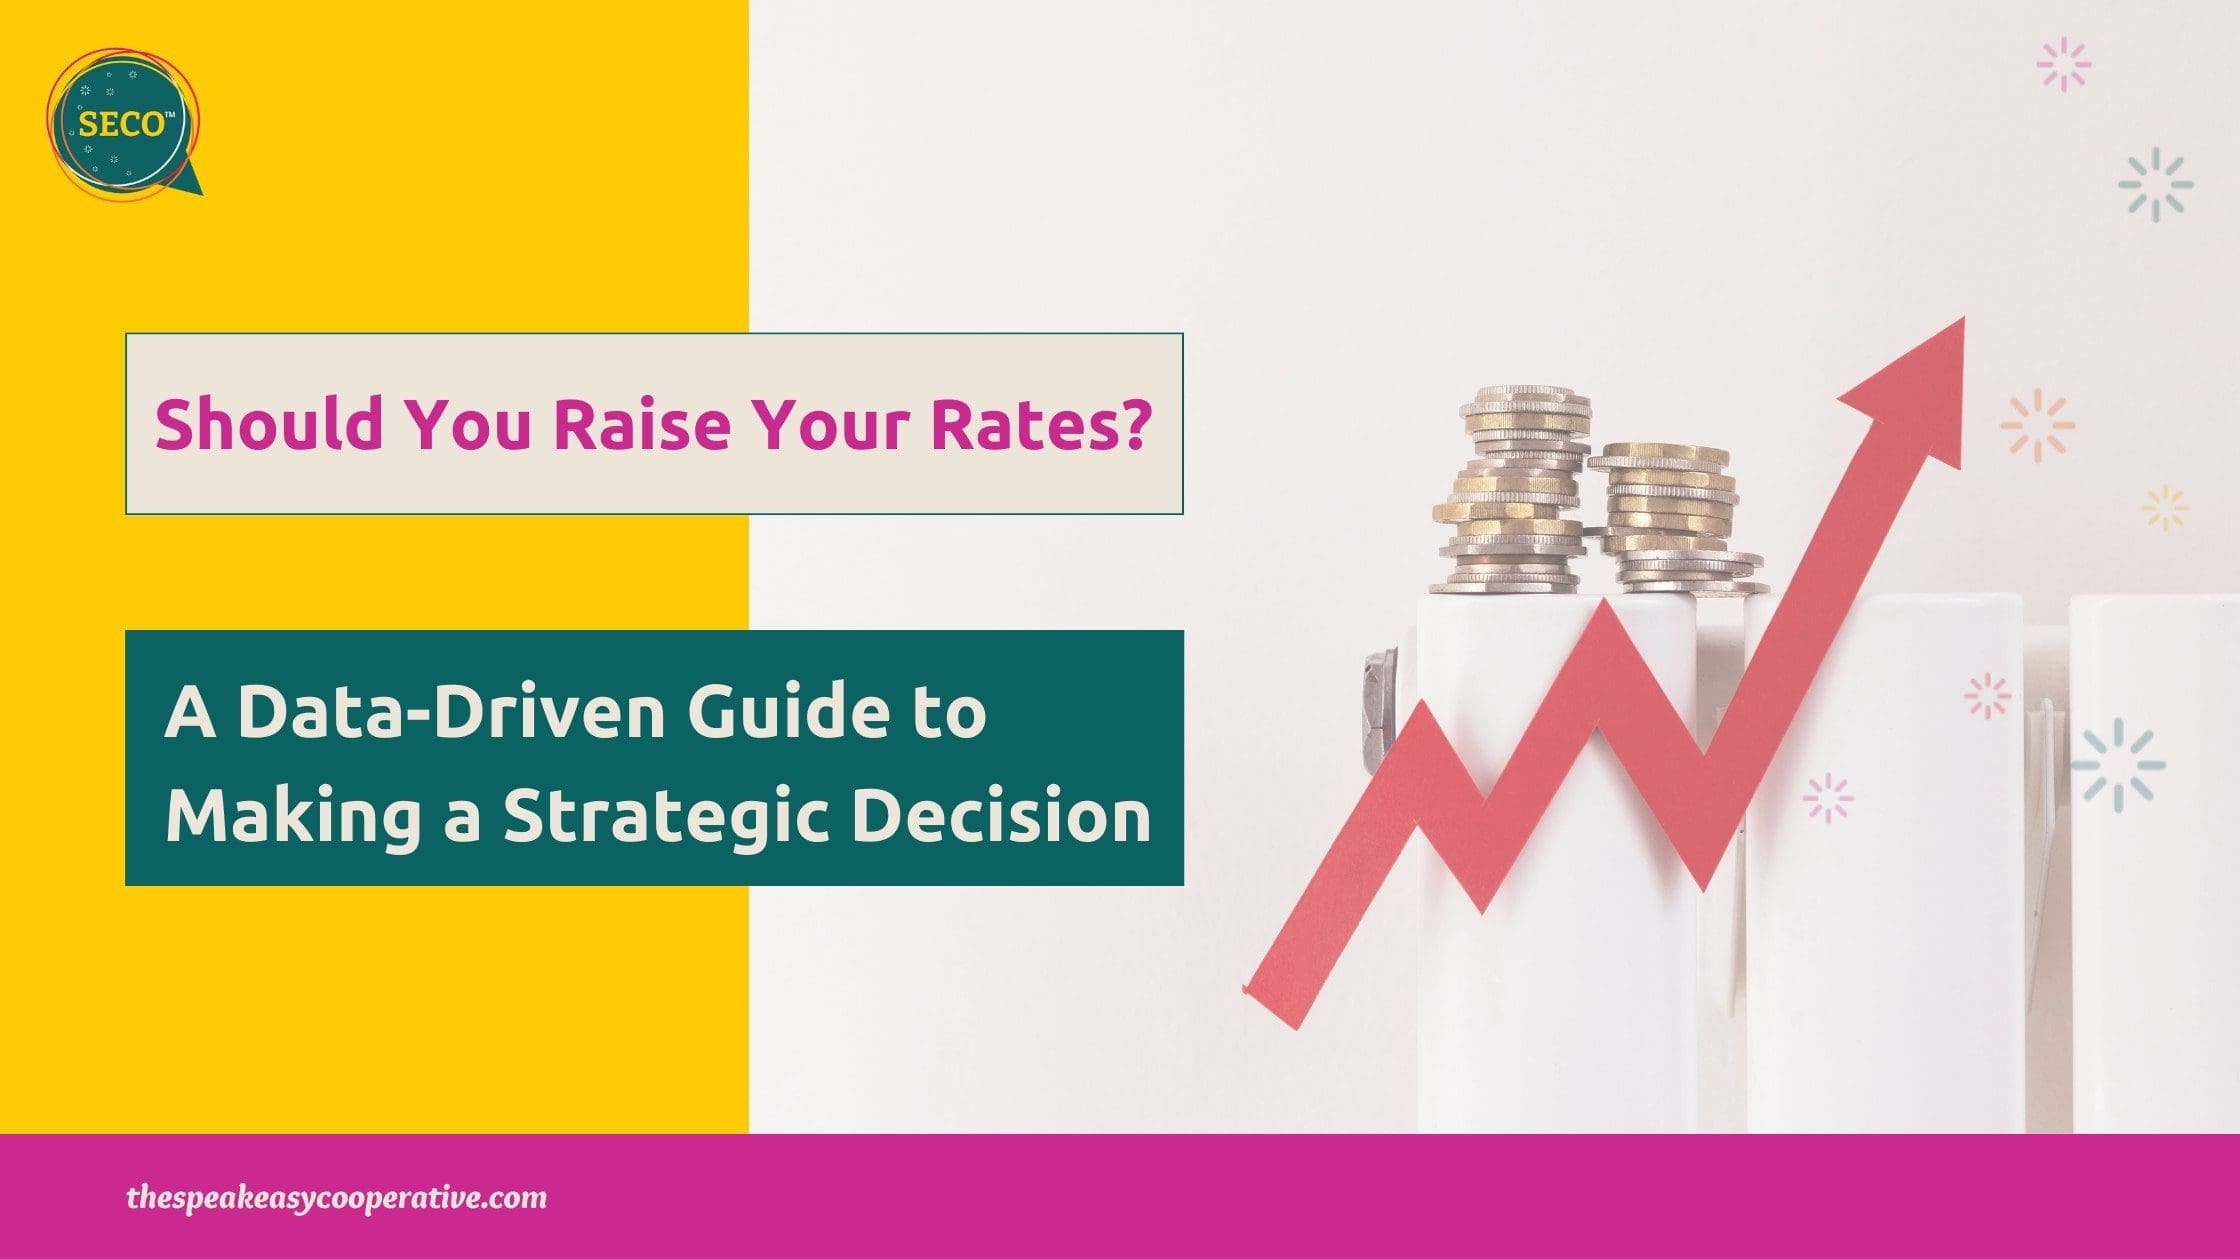 Coins are stacked up and getting higher, with a an arrow showing a zig zag upward trend to represent the text in the image, which reads, "Should You Raise Your Rates? A Data-Driven Guide to Making a Strategic Decision".